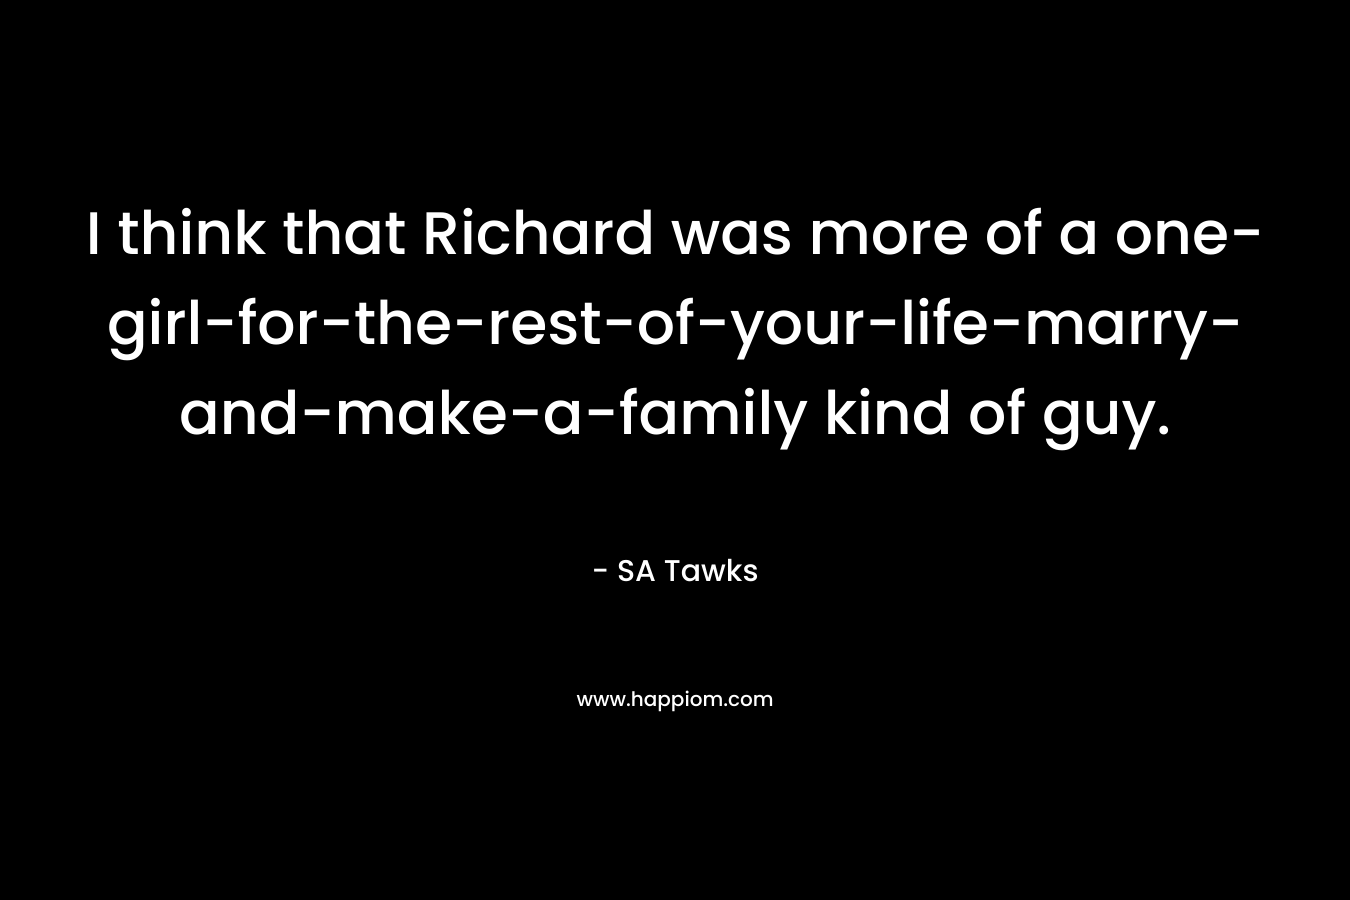 I think that Richard was more of a one-girl-for-the-rest-of-your-life-marry-and-make-a-family kind of guy.